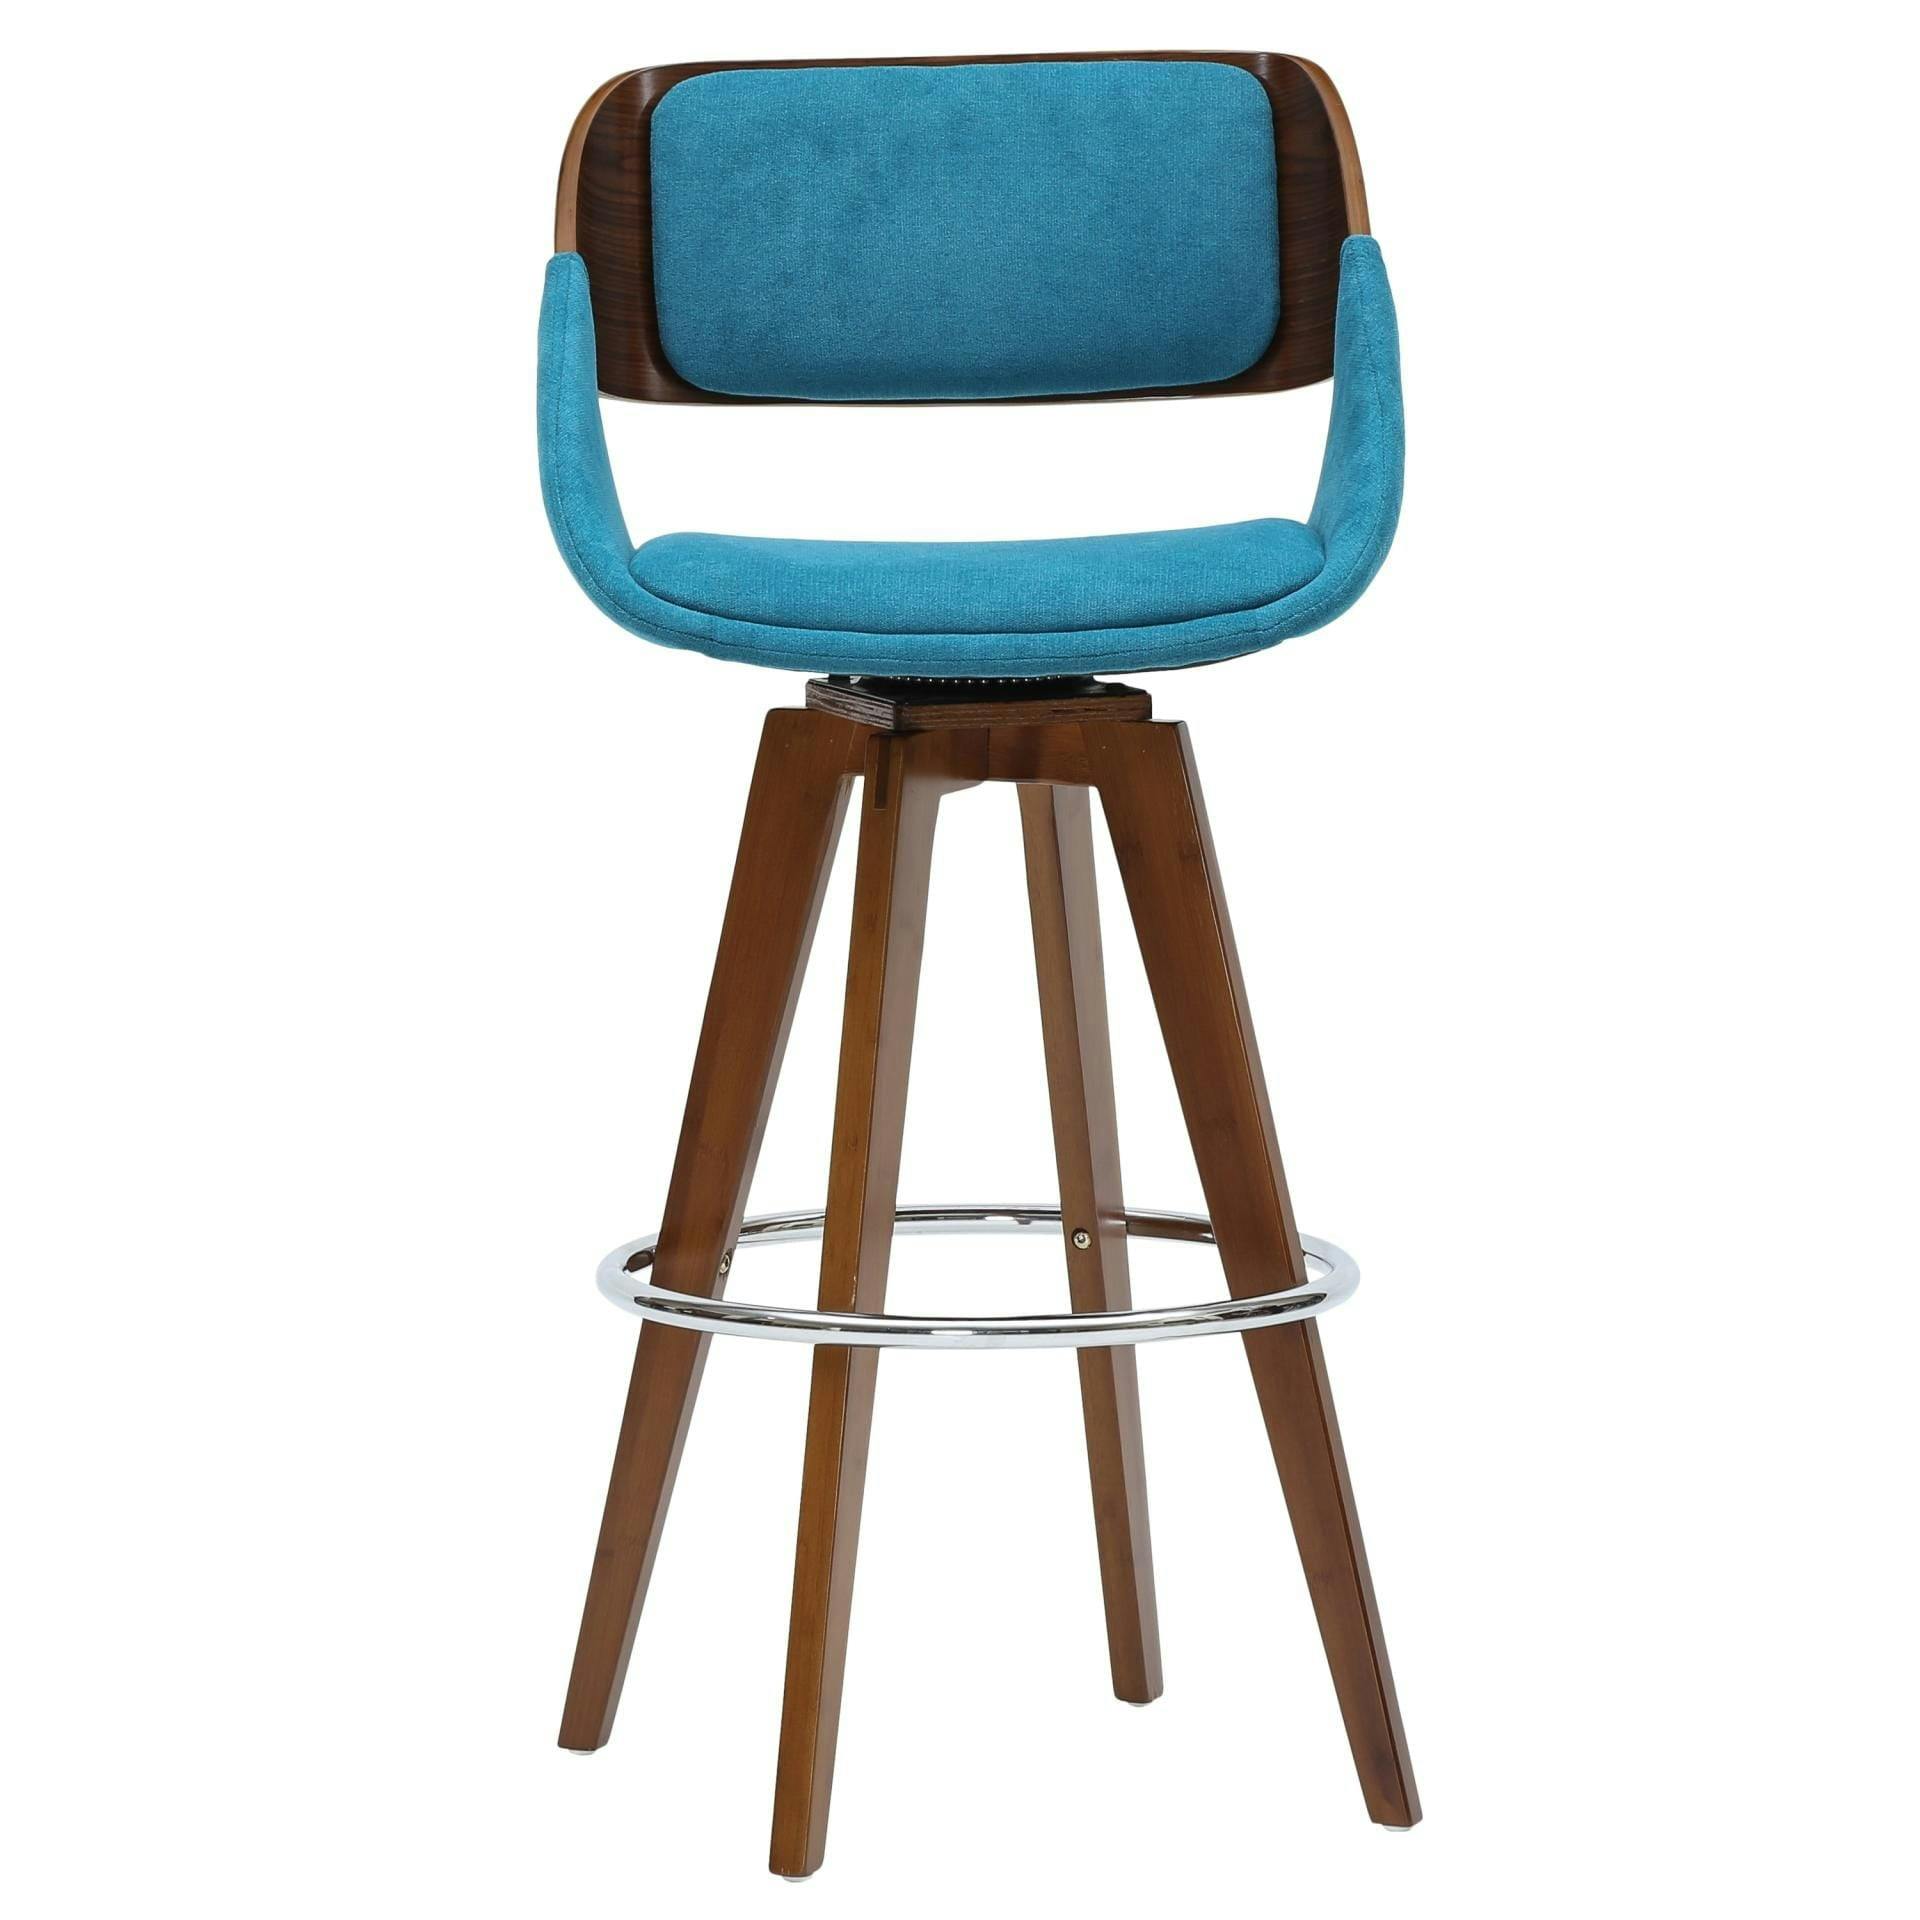 Santorini Teal Swivel Counter Stool with Chrome Footrest and Walnut Finish